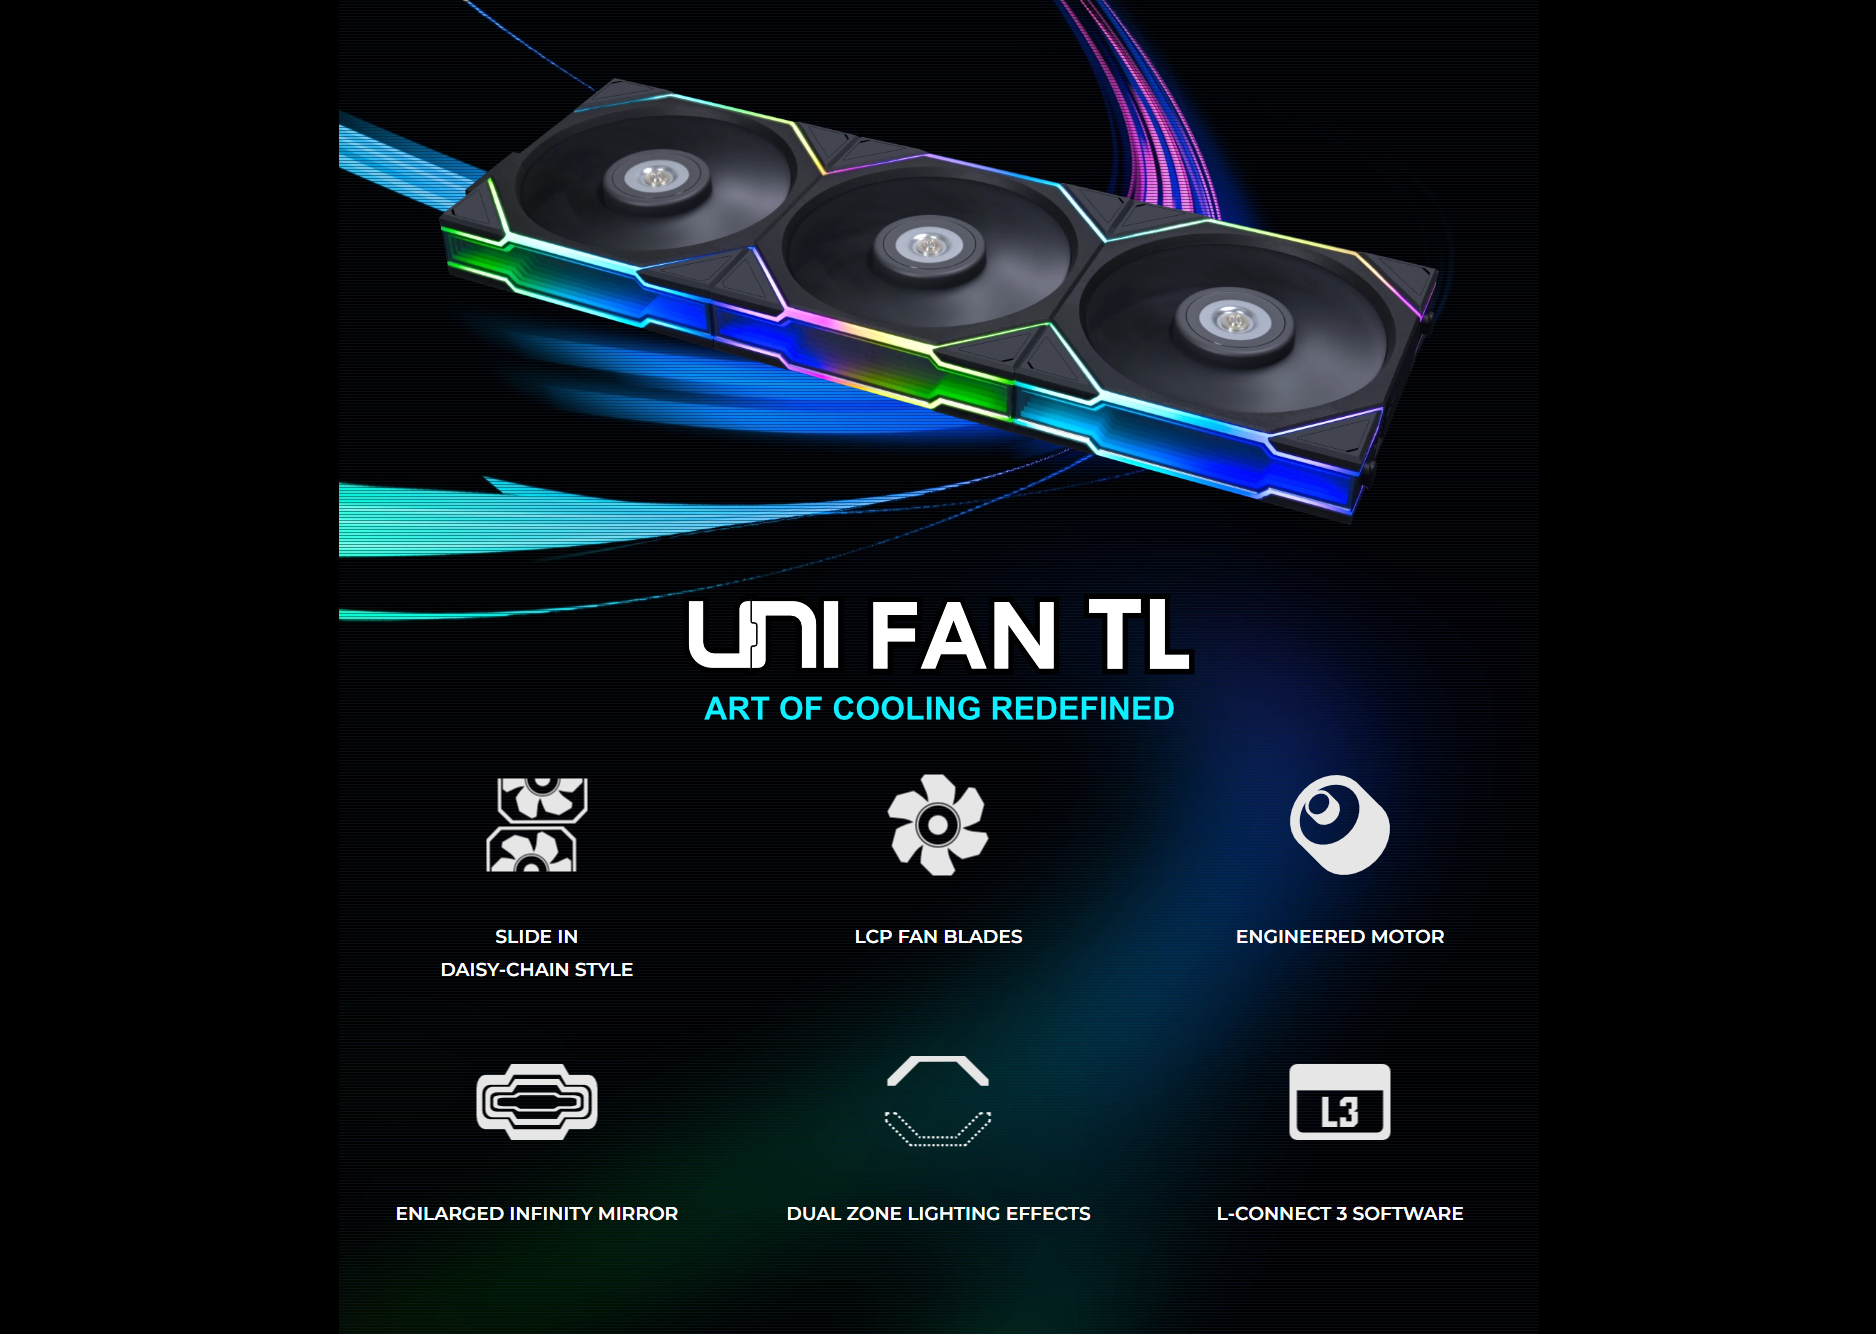 A large marketing image providing additional information about the product Lian Li UNI Fan TL 120 Reverse Blade 120mm Fan Triple Pack - Black (Controller Included) - Additional alt info not provided